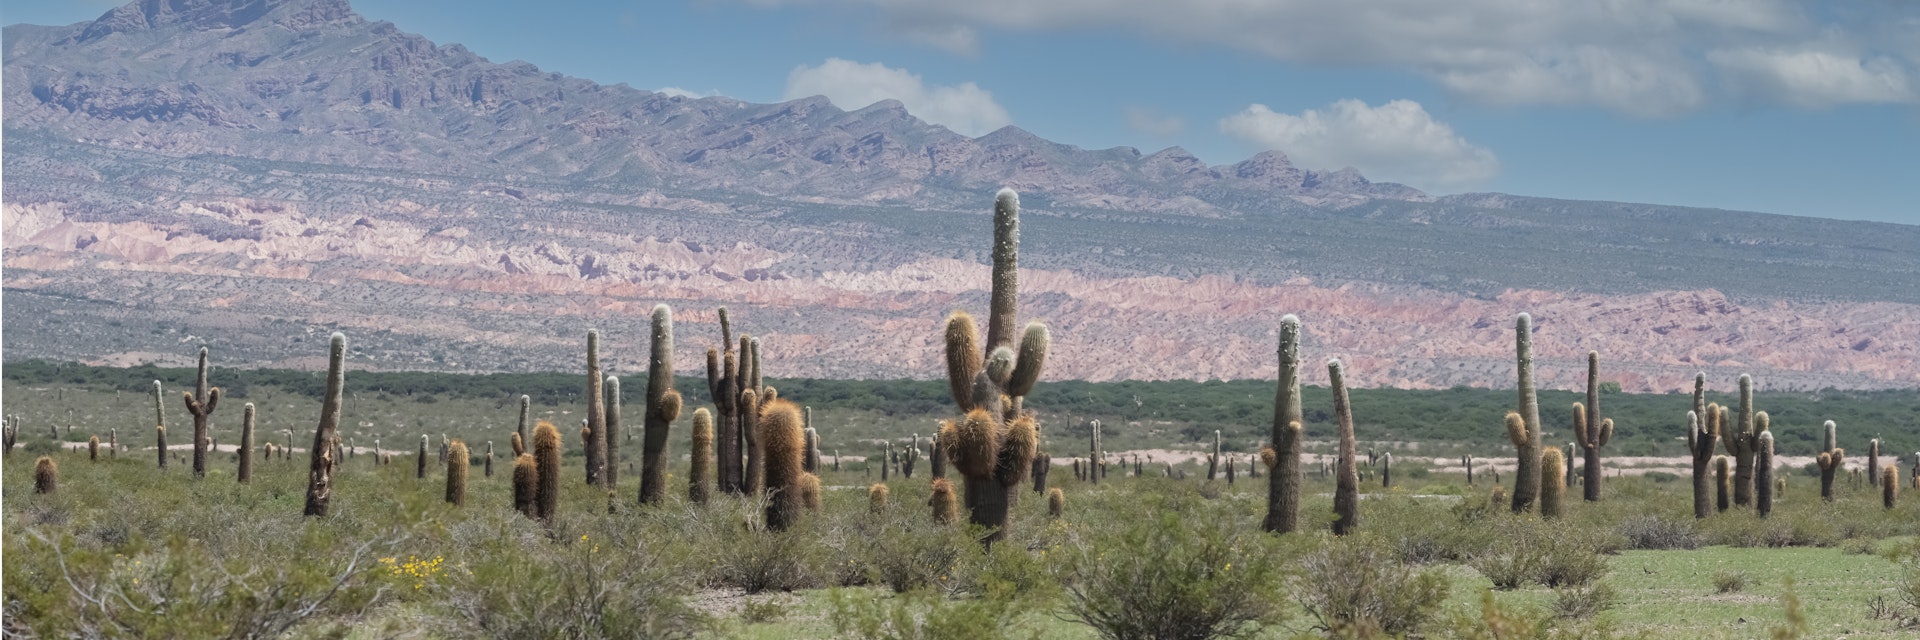 Giant cactus forest in Los Cardones National Park.